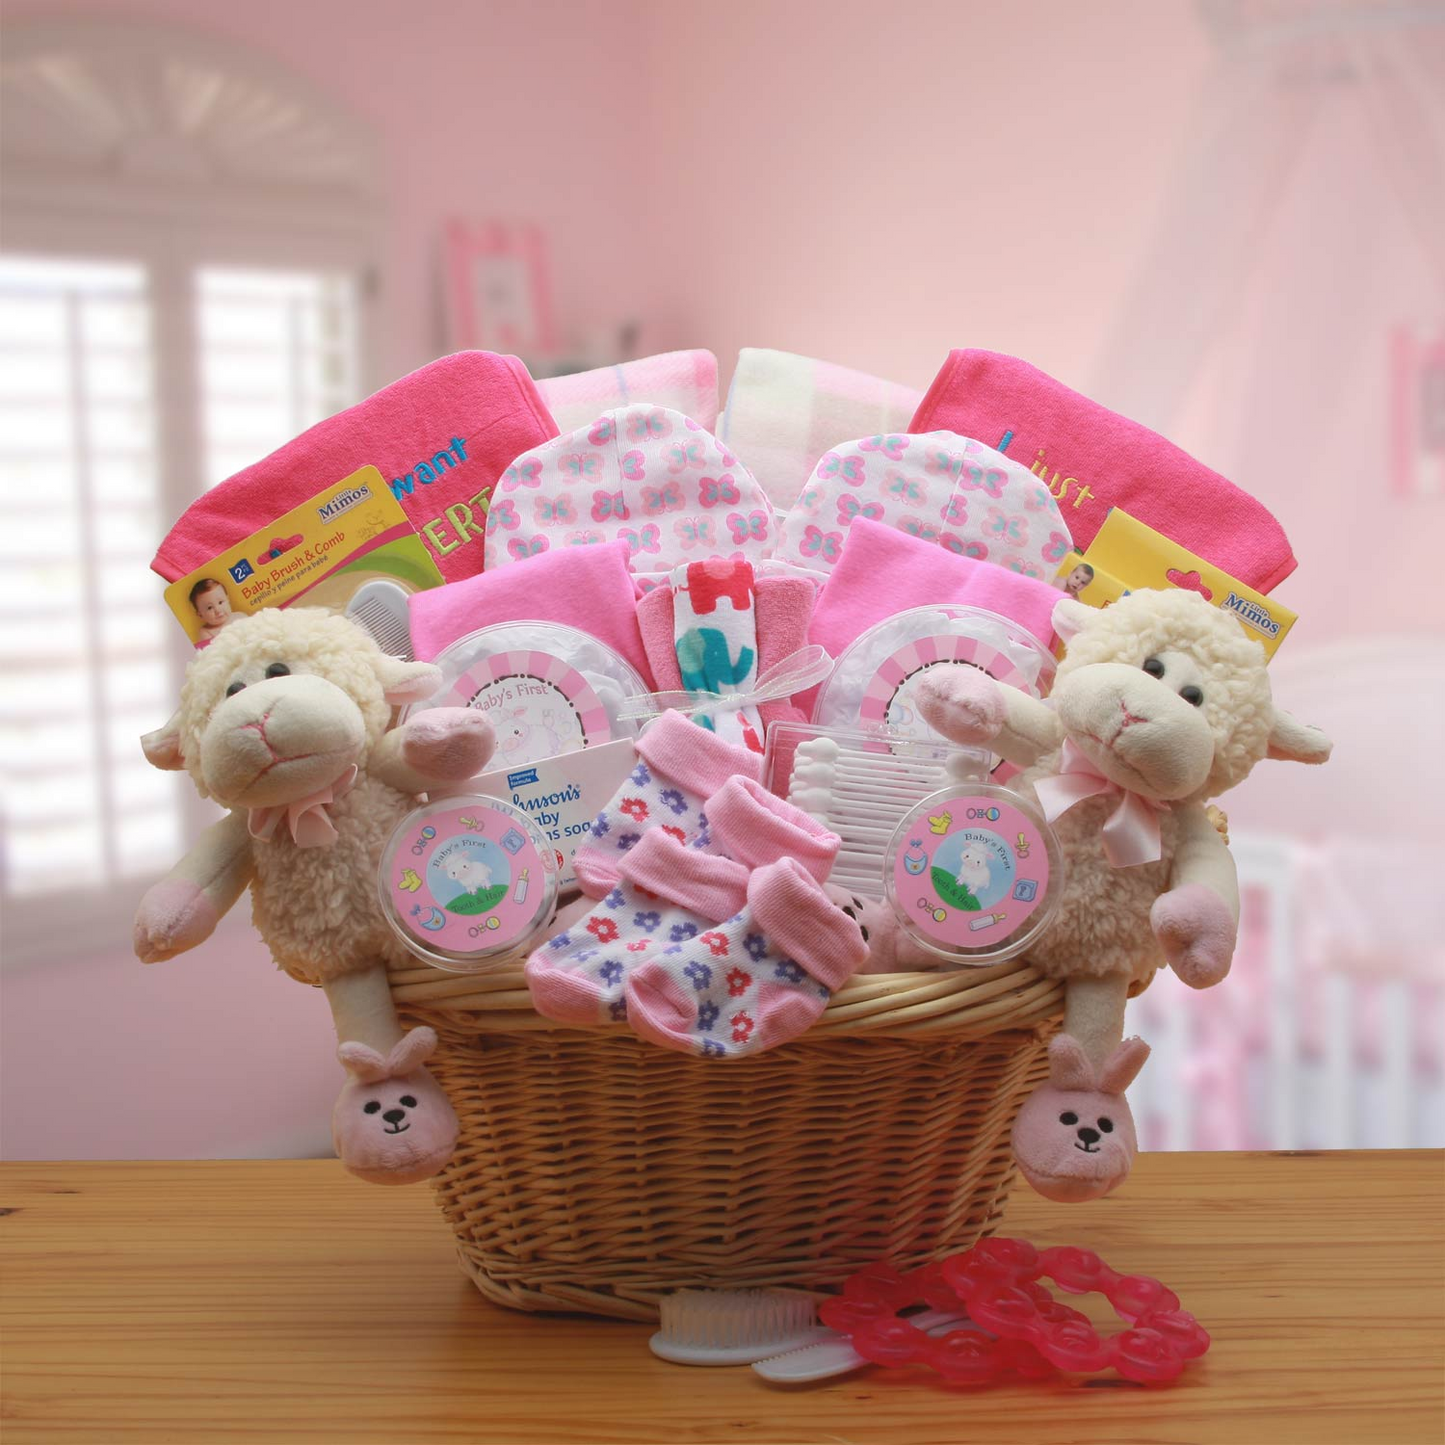 Double Delight Twins New Babies Gift Basket - Pink | Baby Bath Set, Baby Girl Gifts, New Baby Gift Basket | Baby Shower Gifts